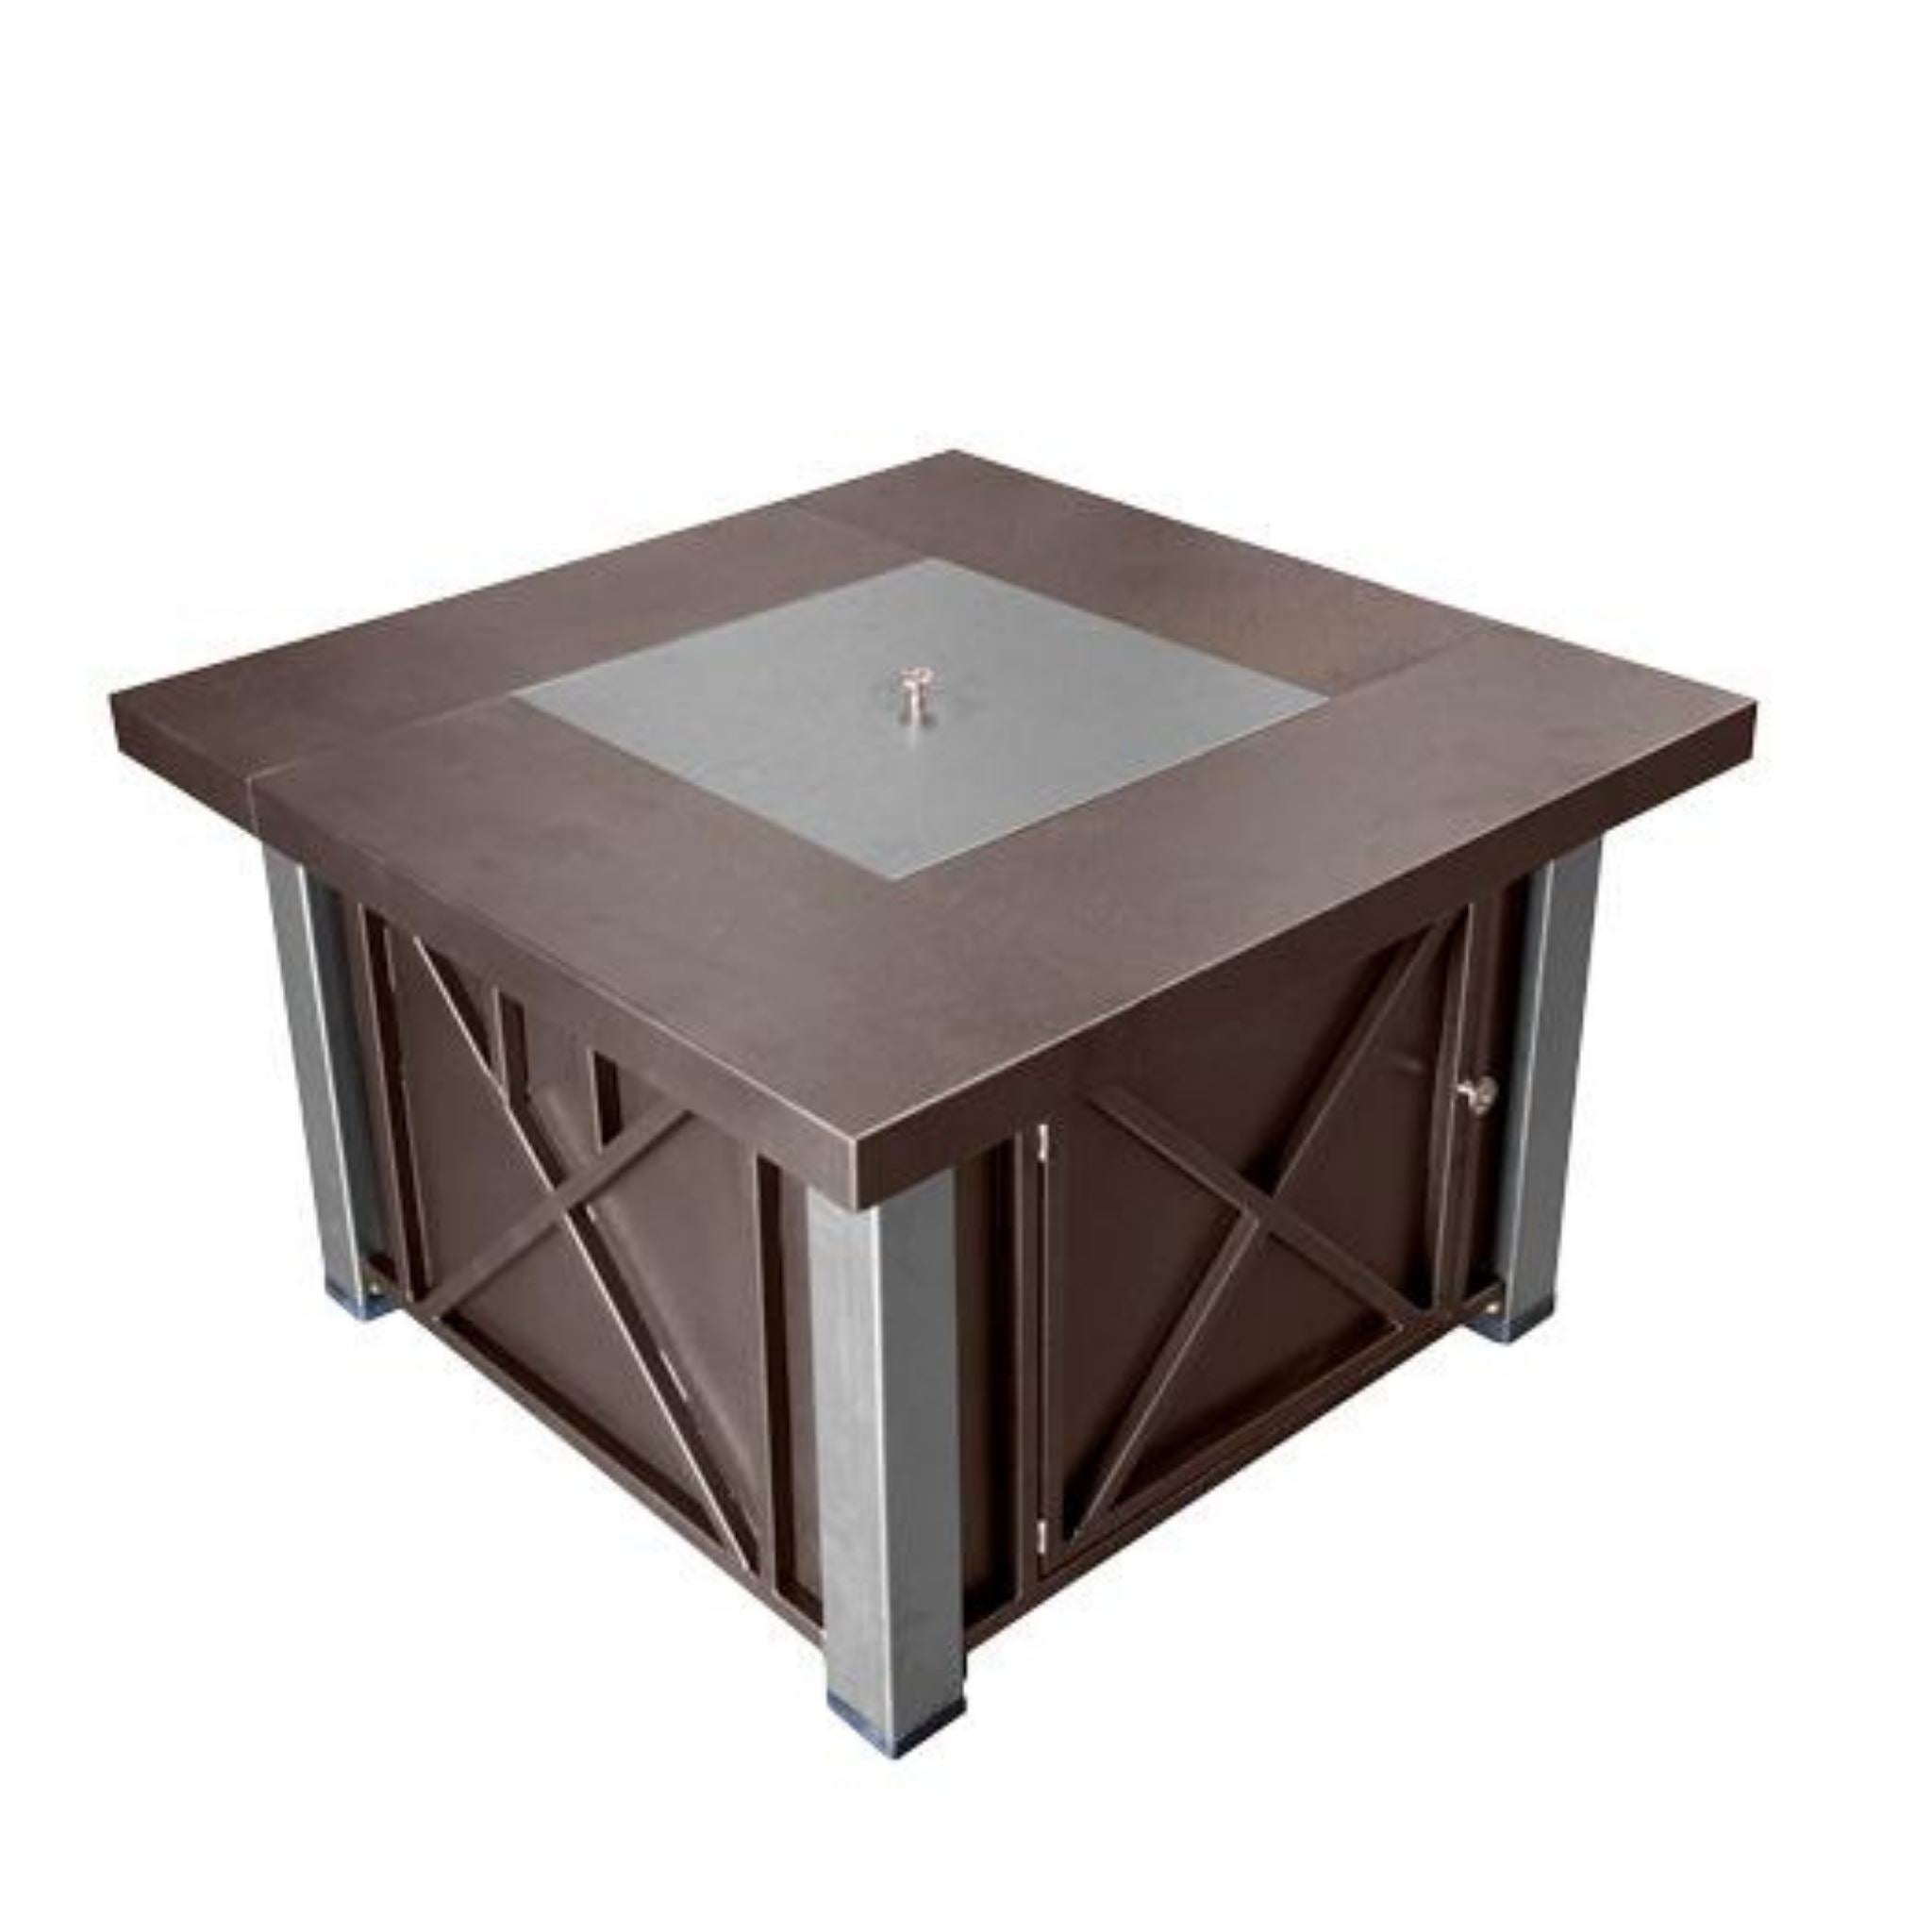 AZ Patio Heaters 38" Decorative Hammered Bronze Fire Pit Table with Stainless Steel Legs and Lid GSF-DGHSS Fire Pit AZ Patio Heaters - top closed | white background